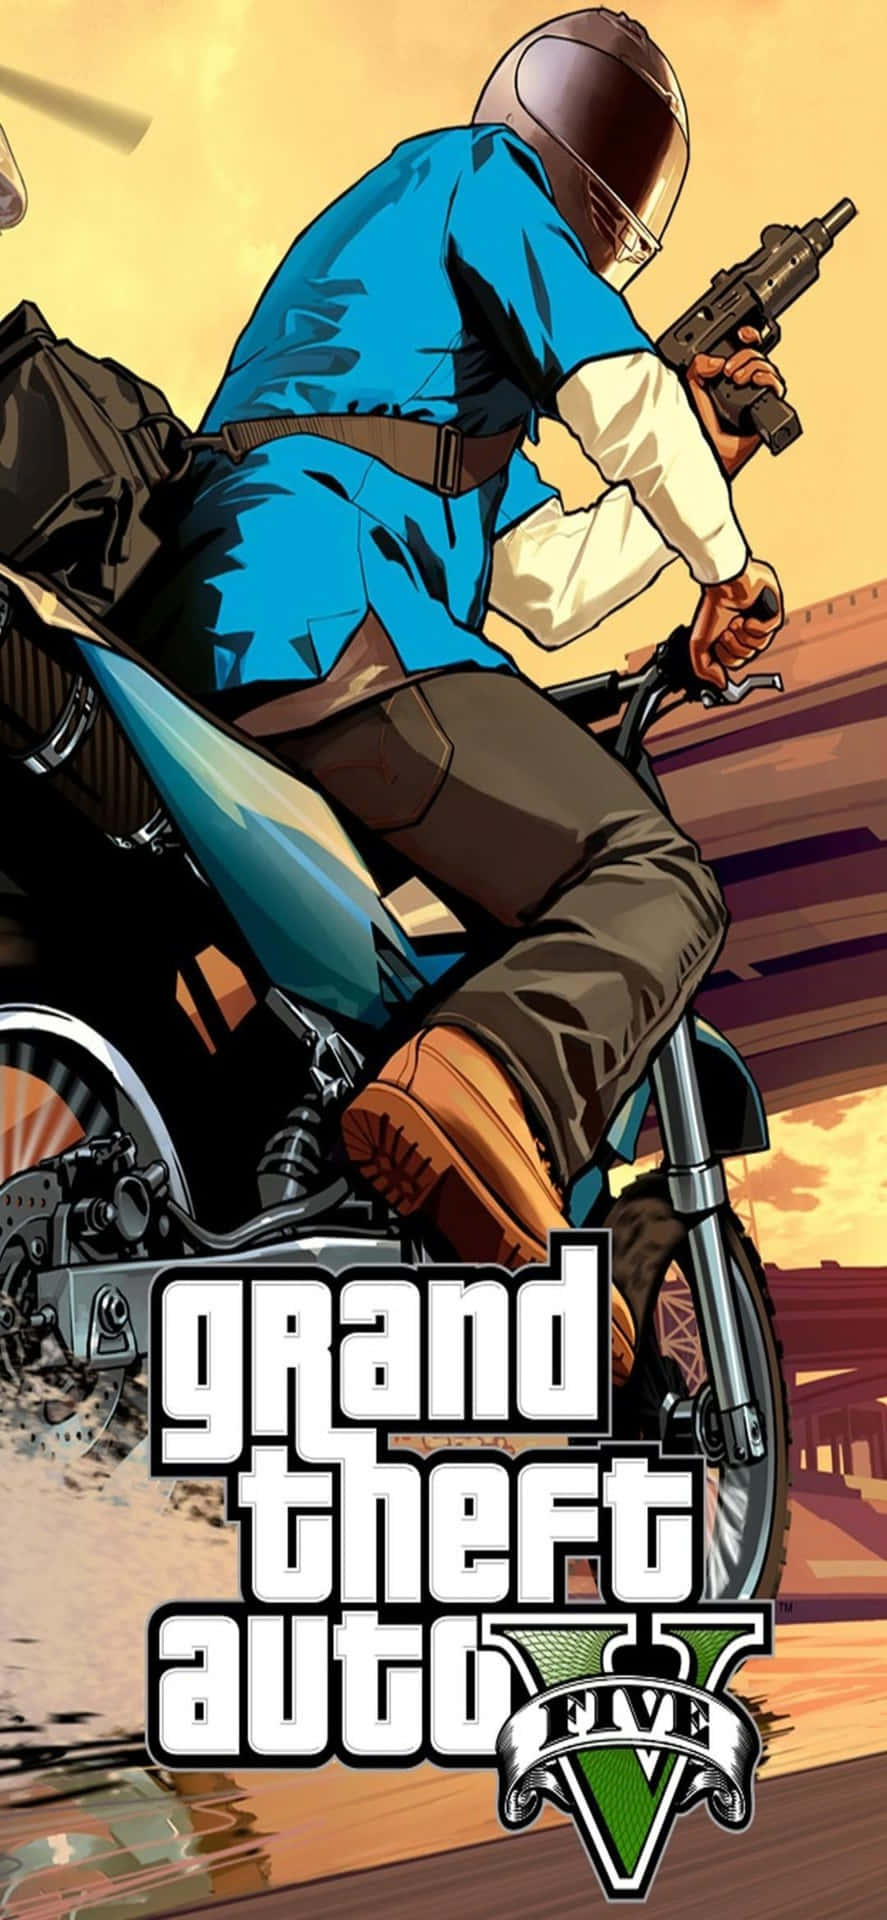 Iphone X Grand Theft Auto V Background&Motorcycle